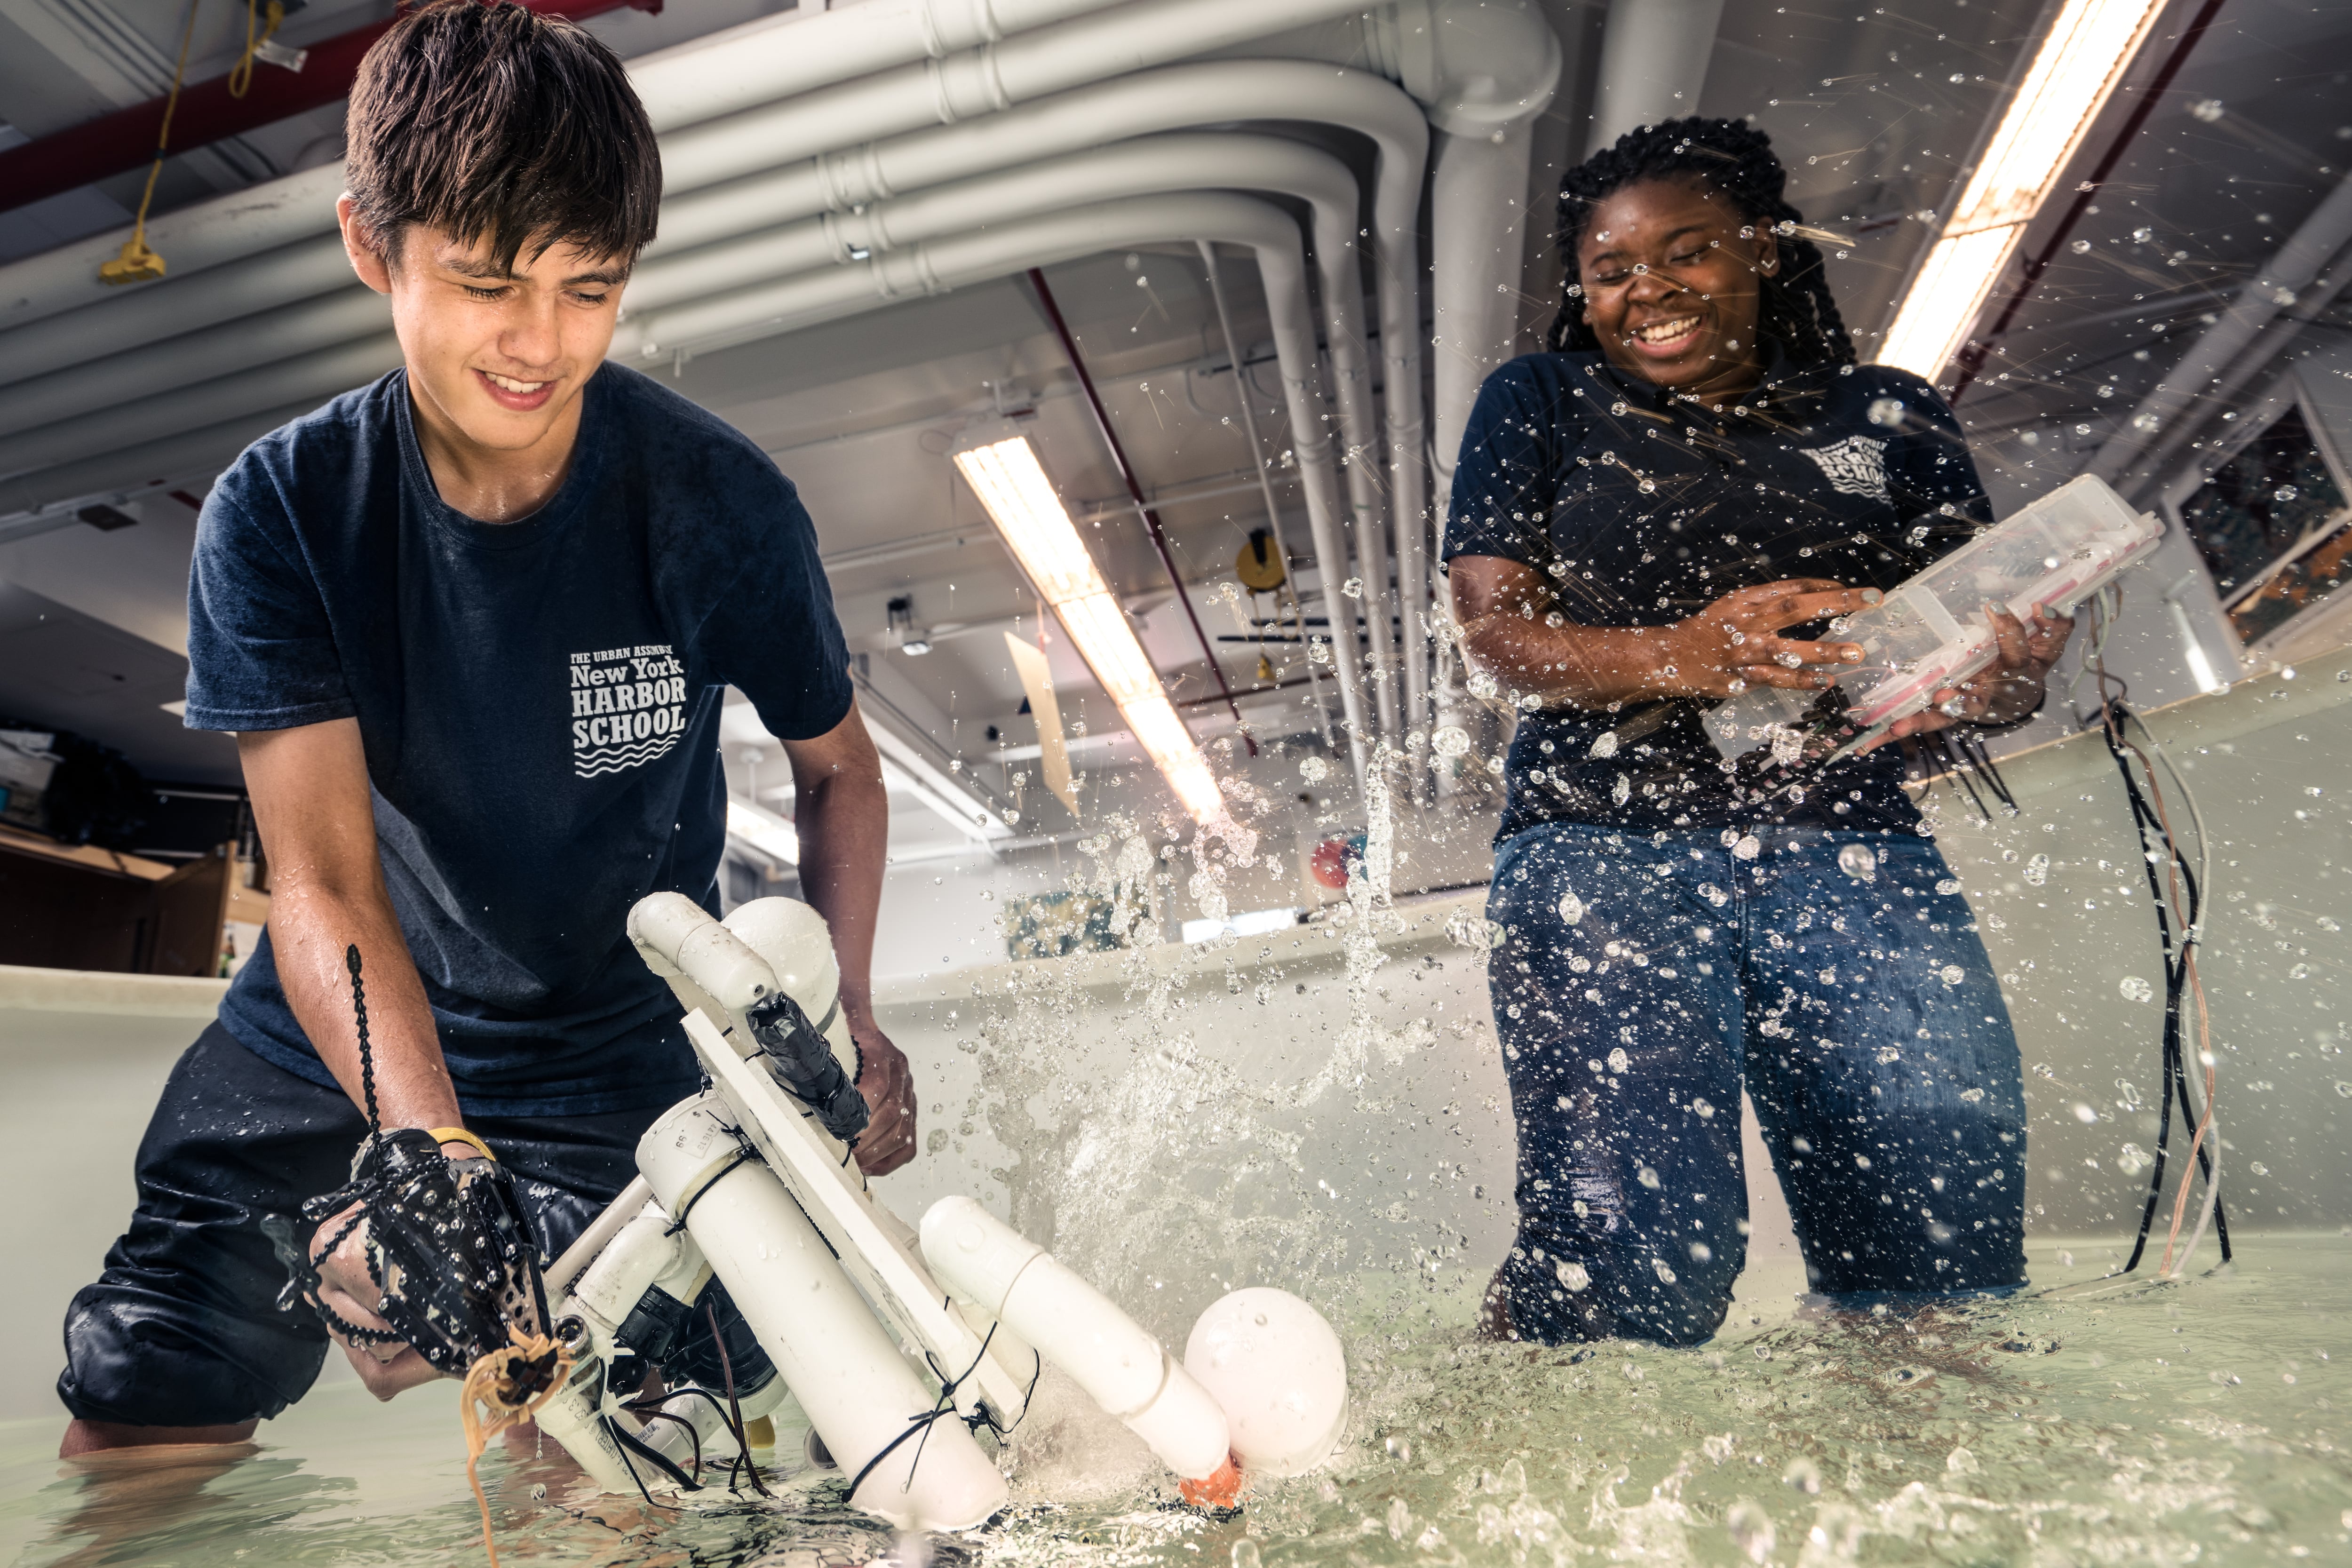 Two students wearing navy blue Urban Assembly New York Harbor School T-shirts get splashed as they play with robotic contraptions.